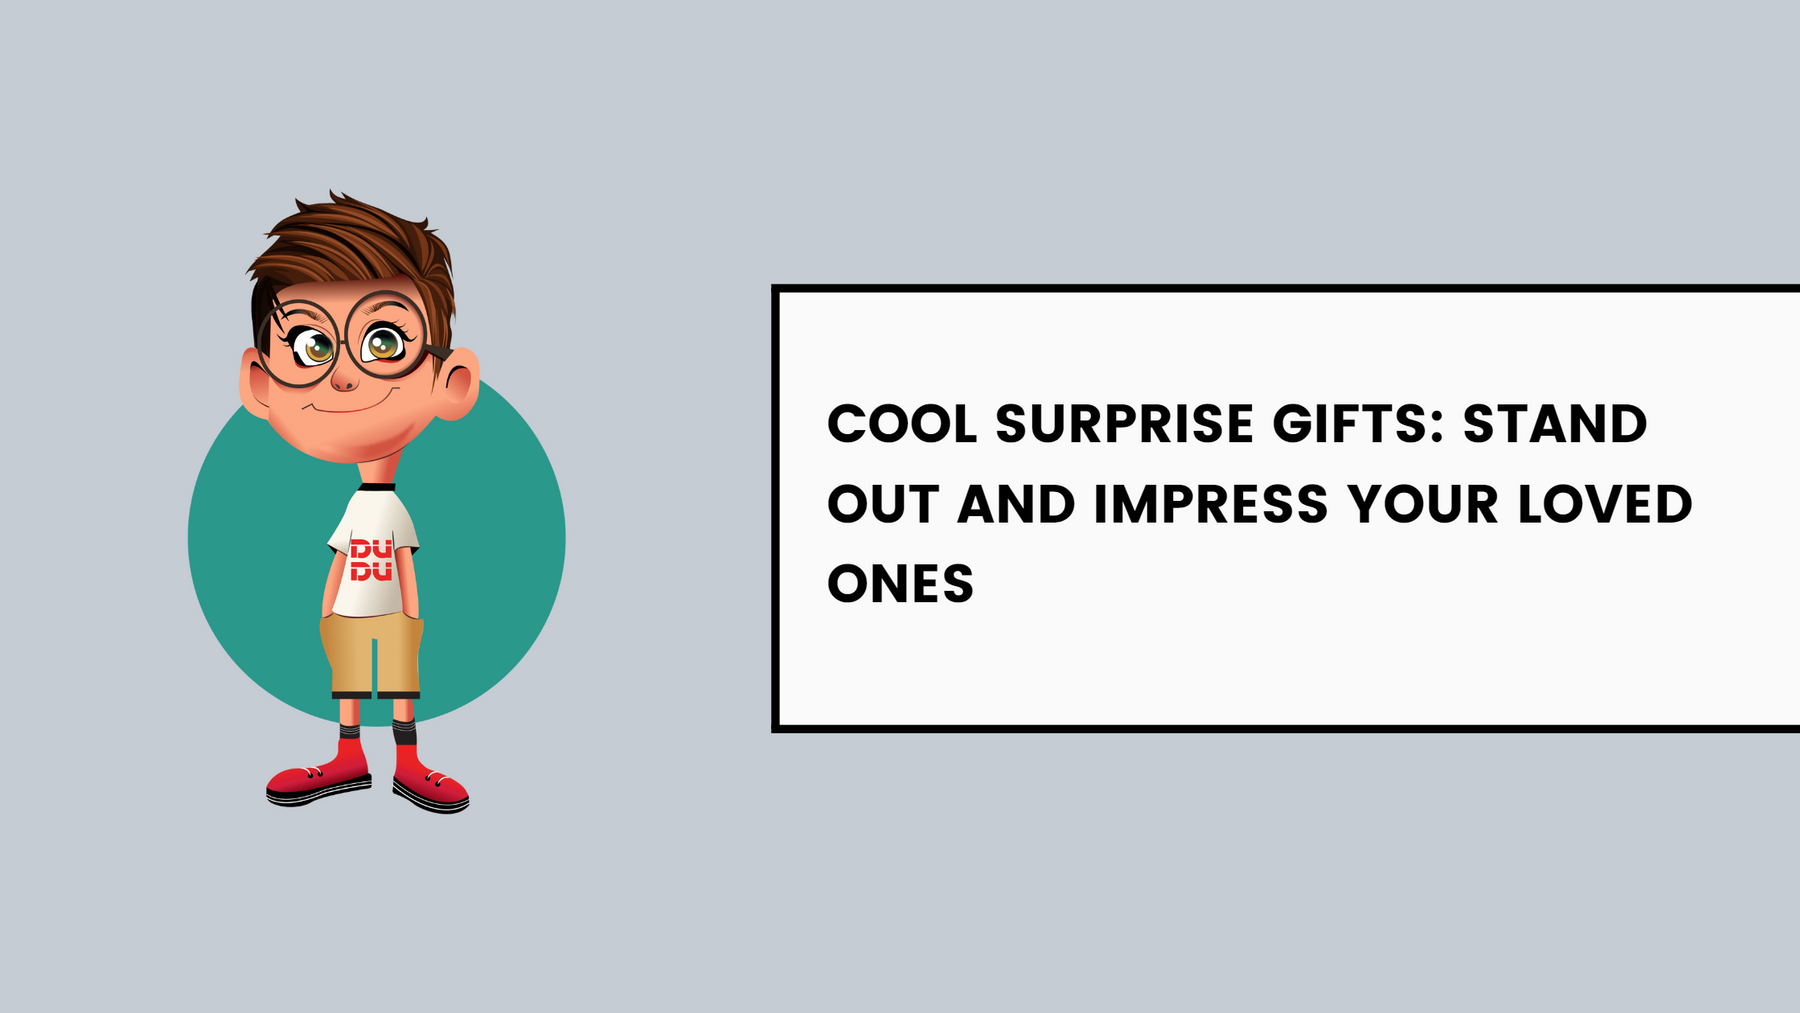 Cool Surprise Gifts: Stand Out And Impress Your Loved Ones